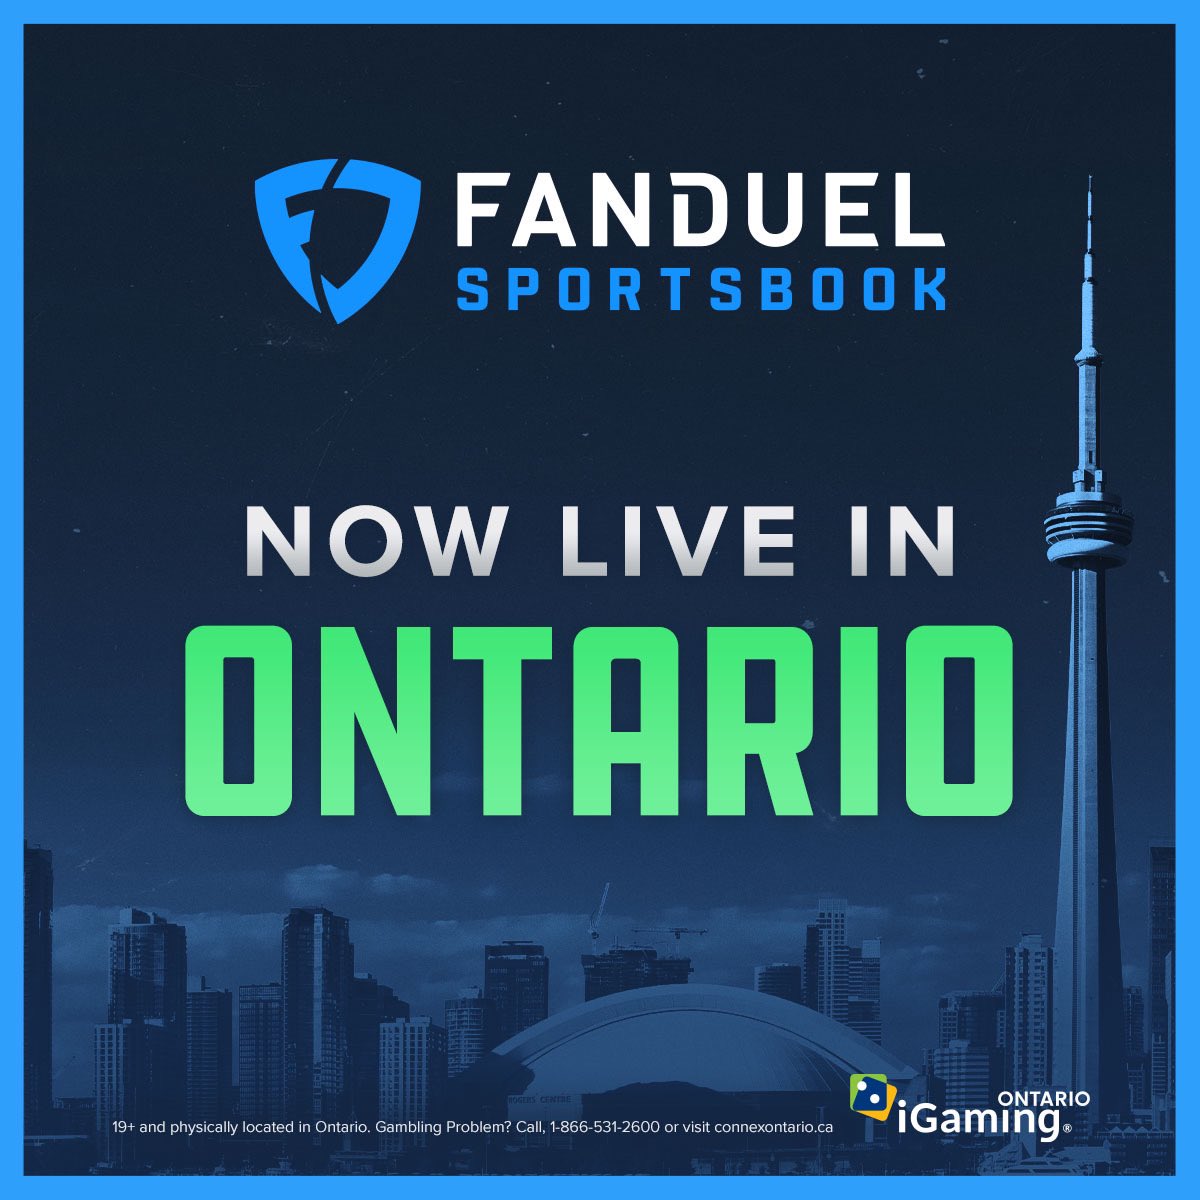 BIG ANNOUNCEMENT for my Canadian friends! @fanduelcanada is now LIVE in Ontario right in time for you to bet on the Stanley Cup playoffs and this upcoming hockey season! Use my link fanduel.com/pavelbarber to sign up and place your bets ASAP. #fanduelcanadapartner